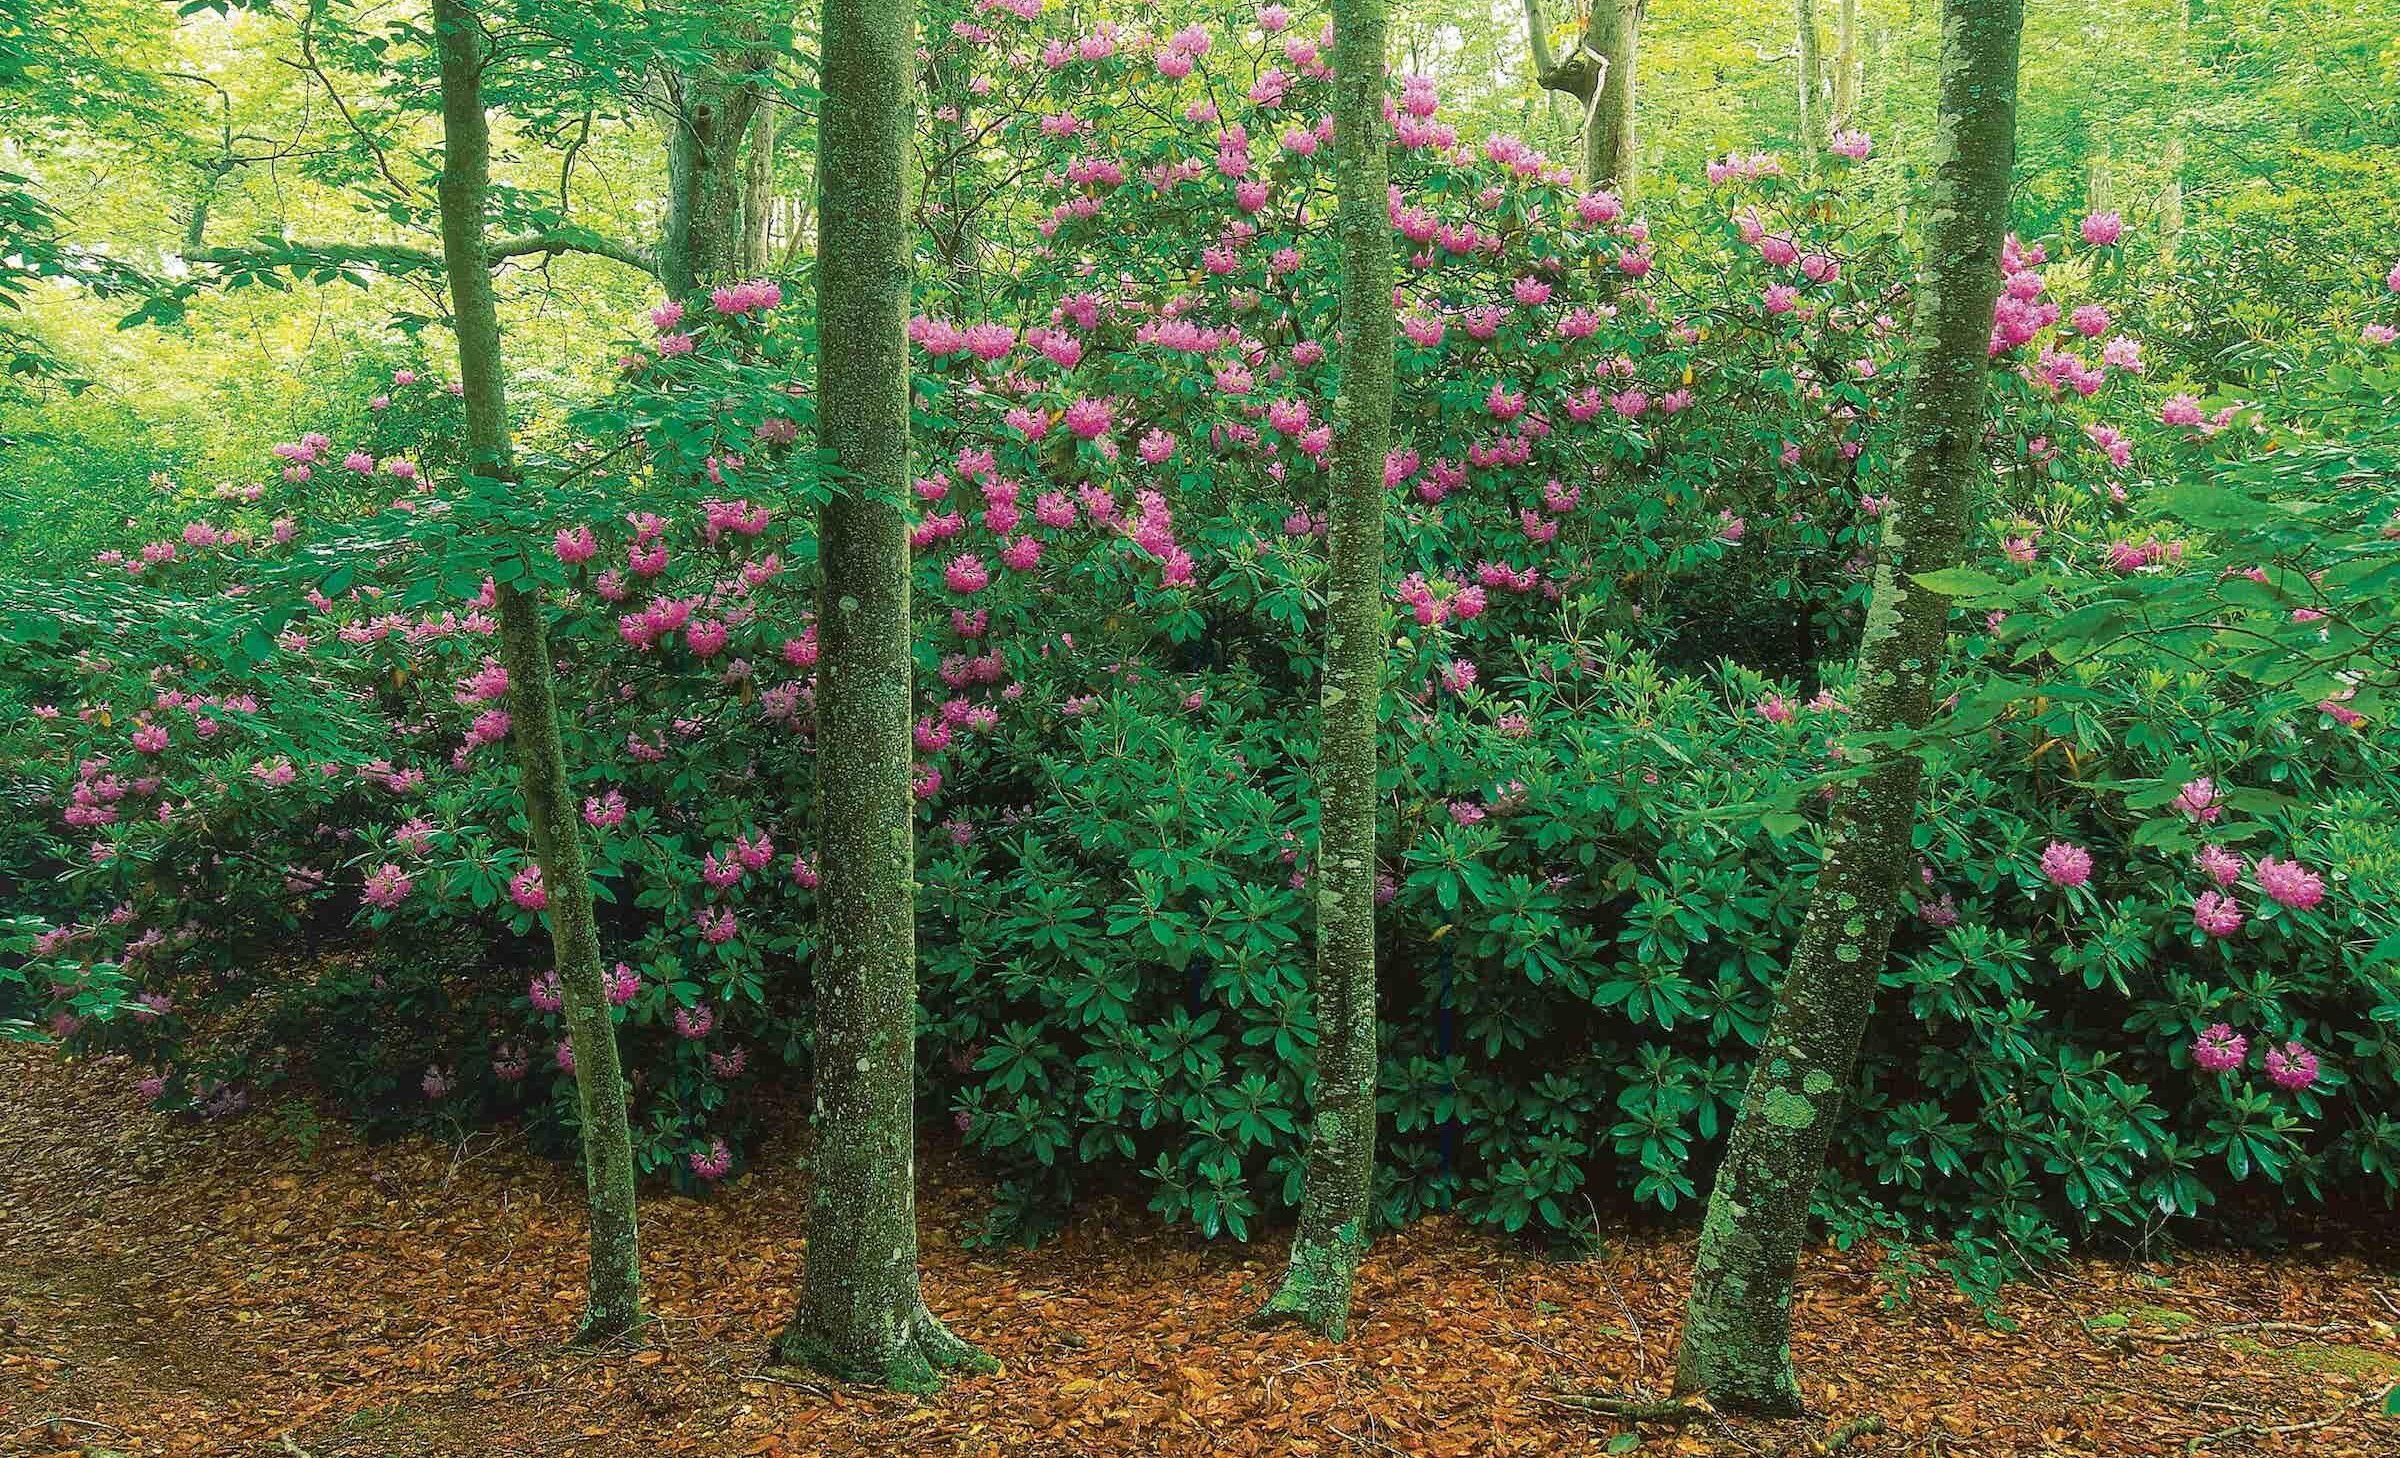 Lowell Holly rhododendrons